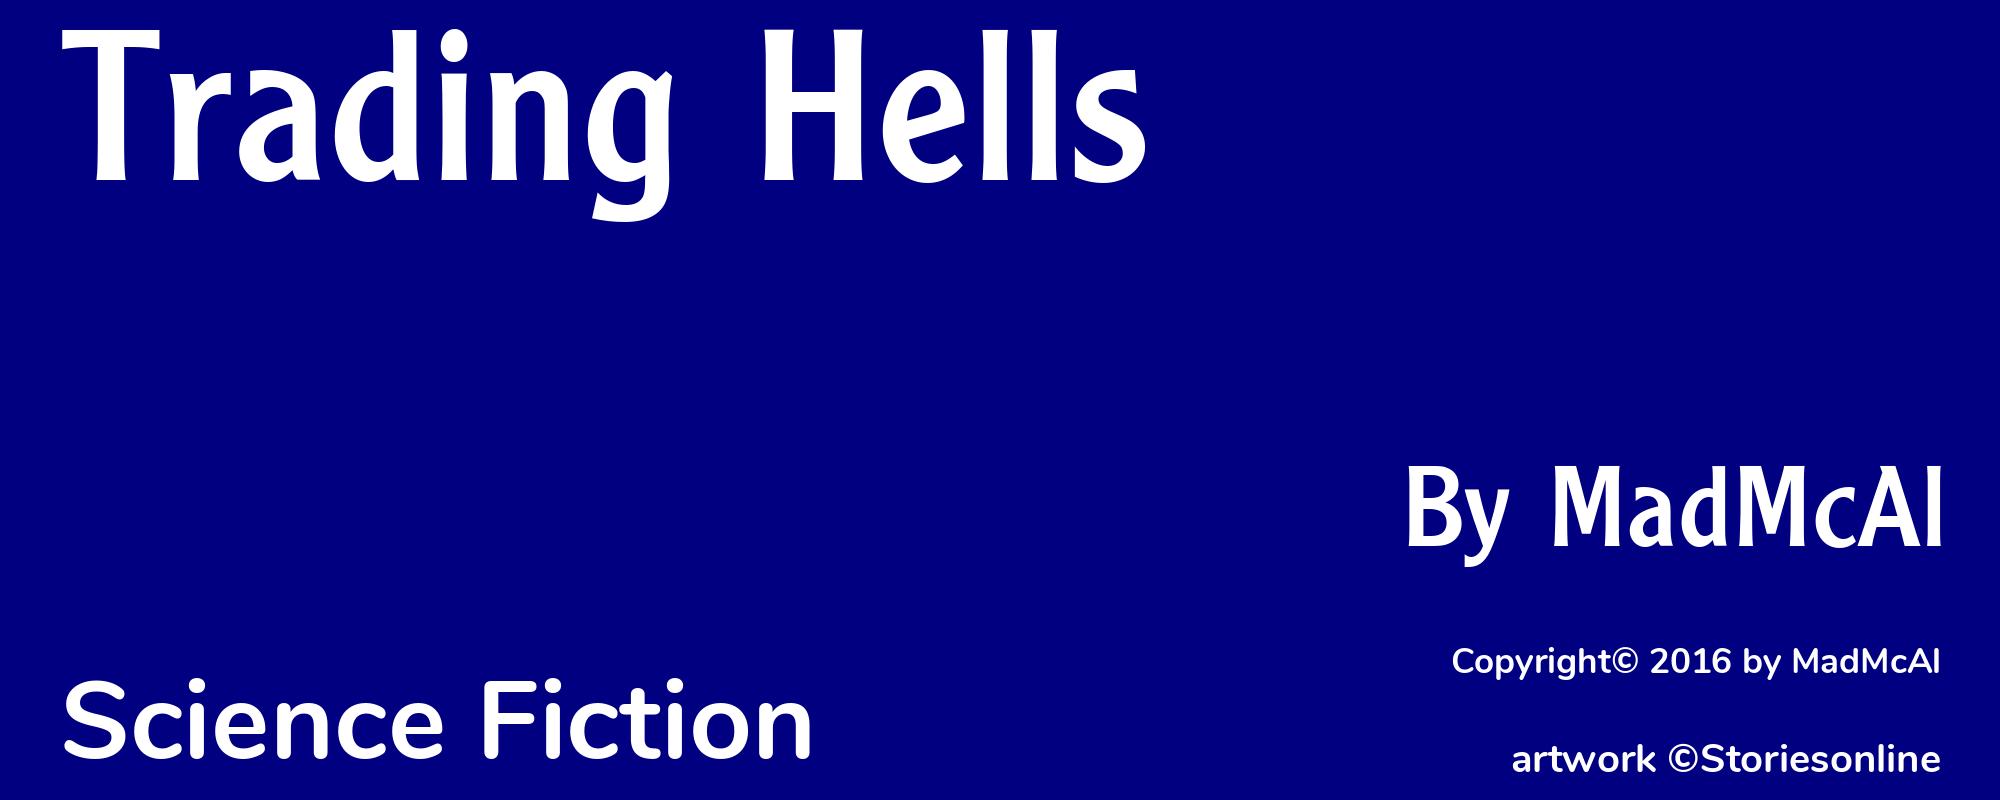 Trading Hells - Cover